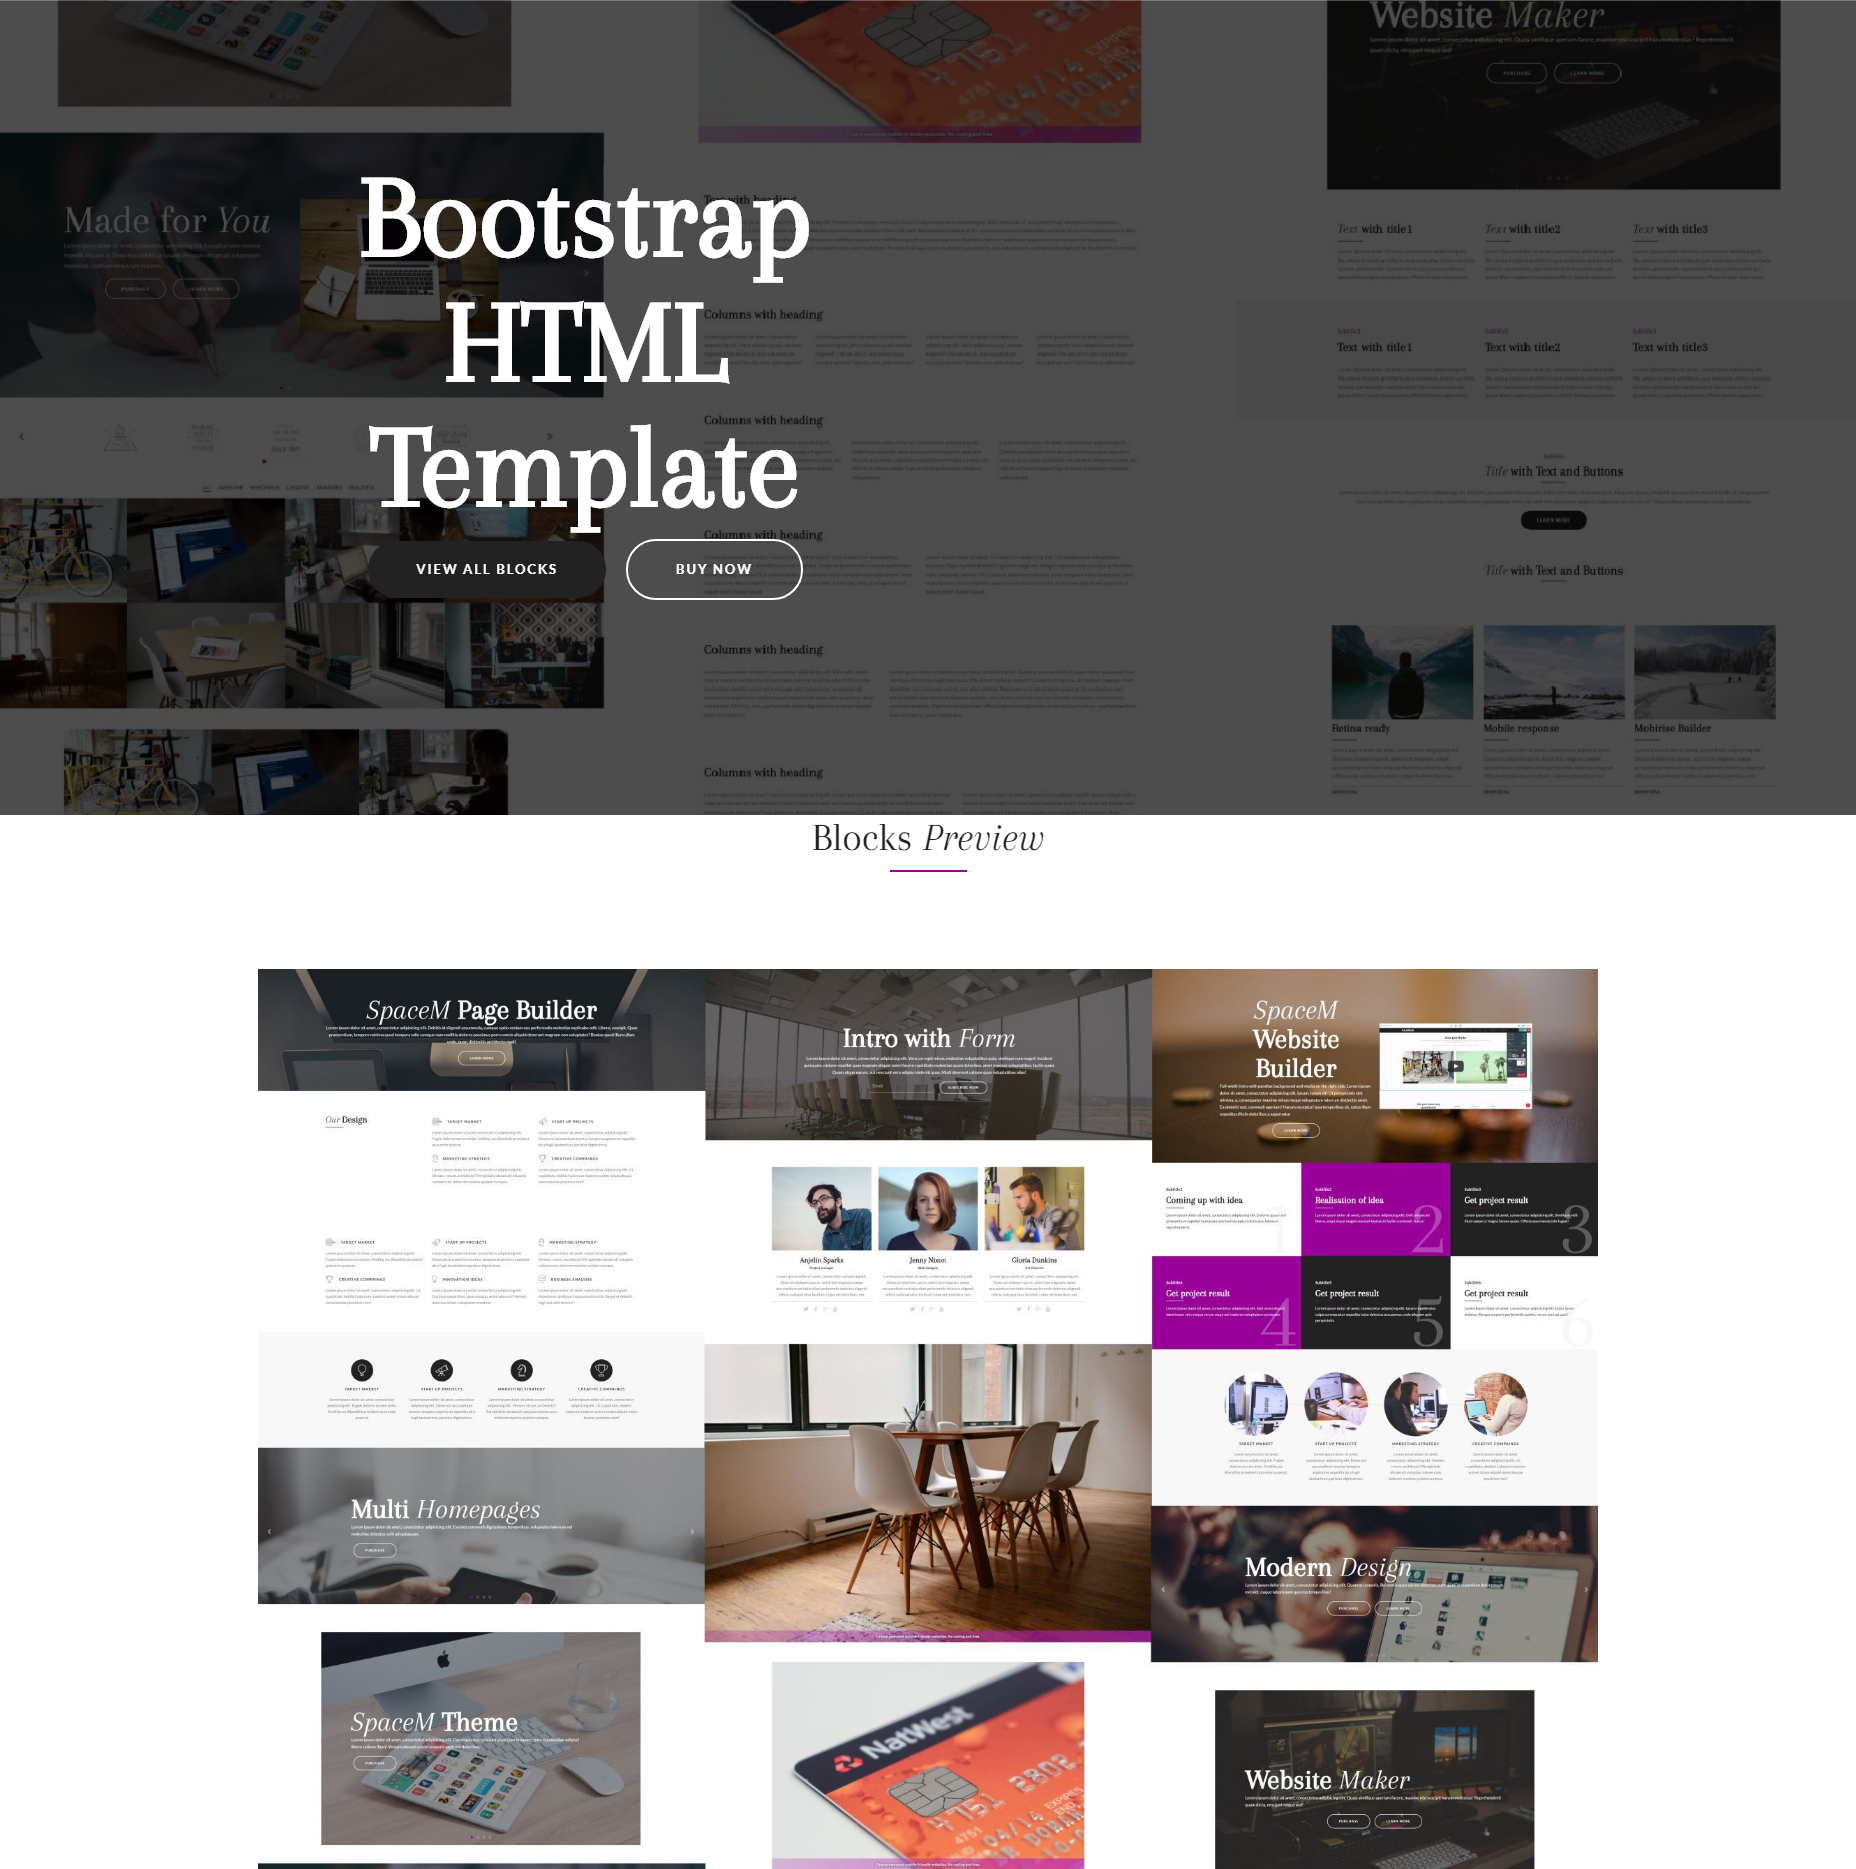 SpaceM HTML Bootstrap Template